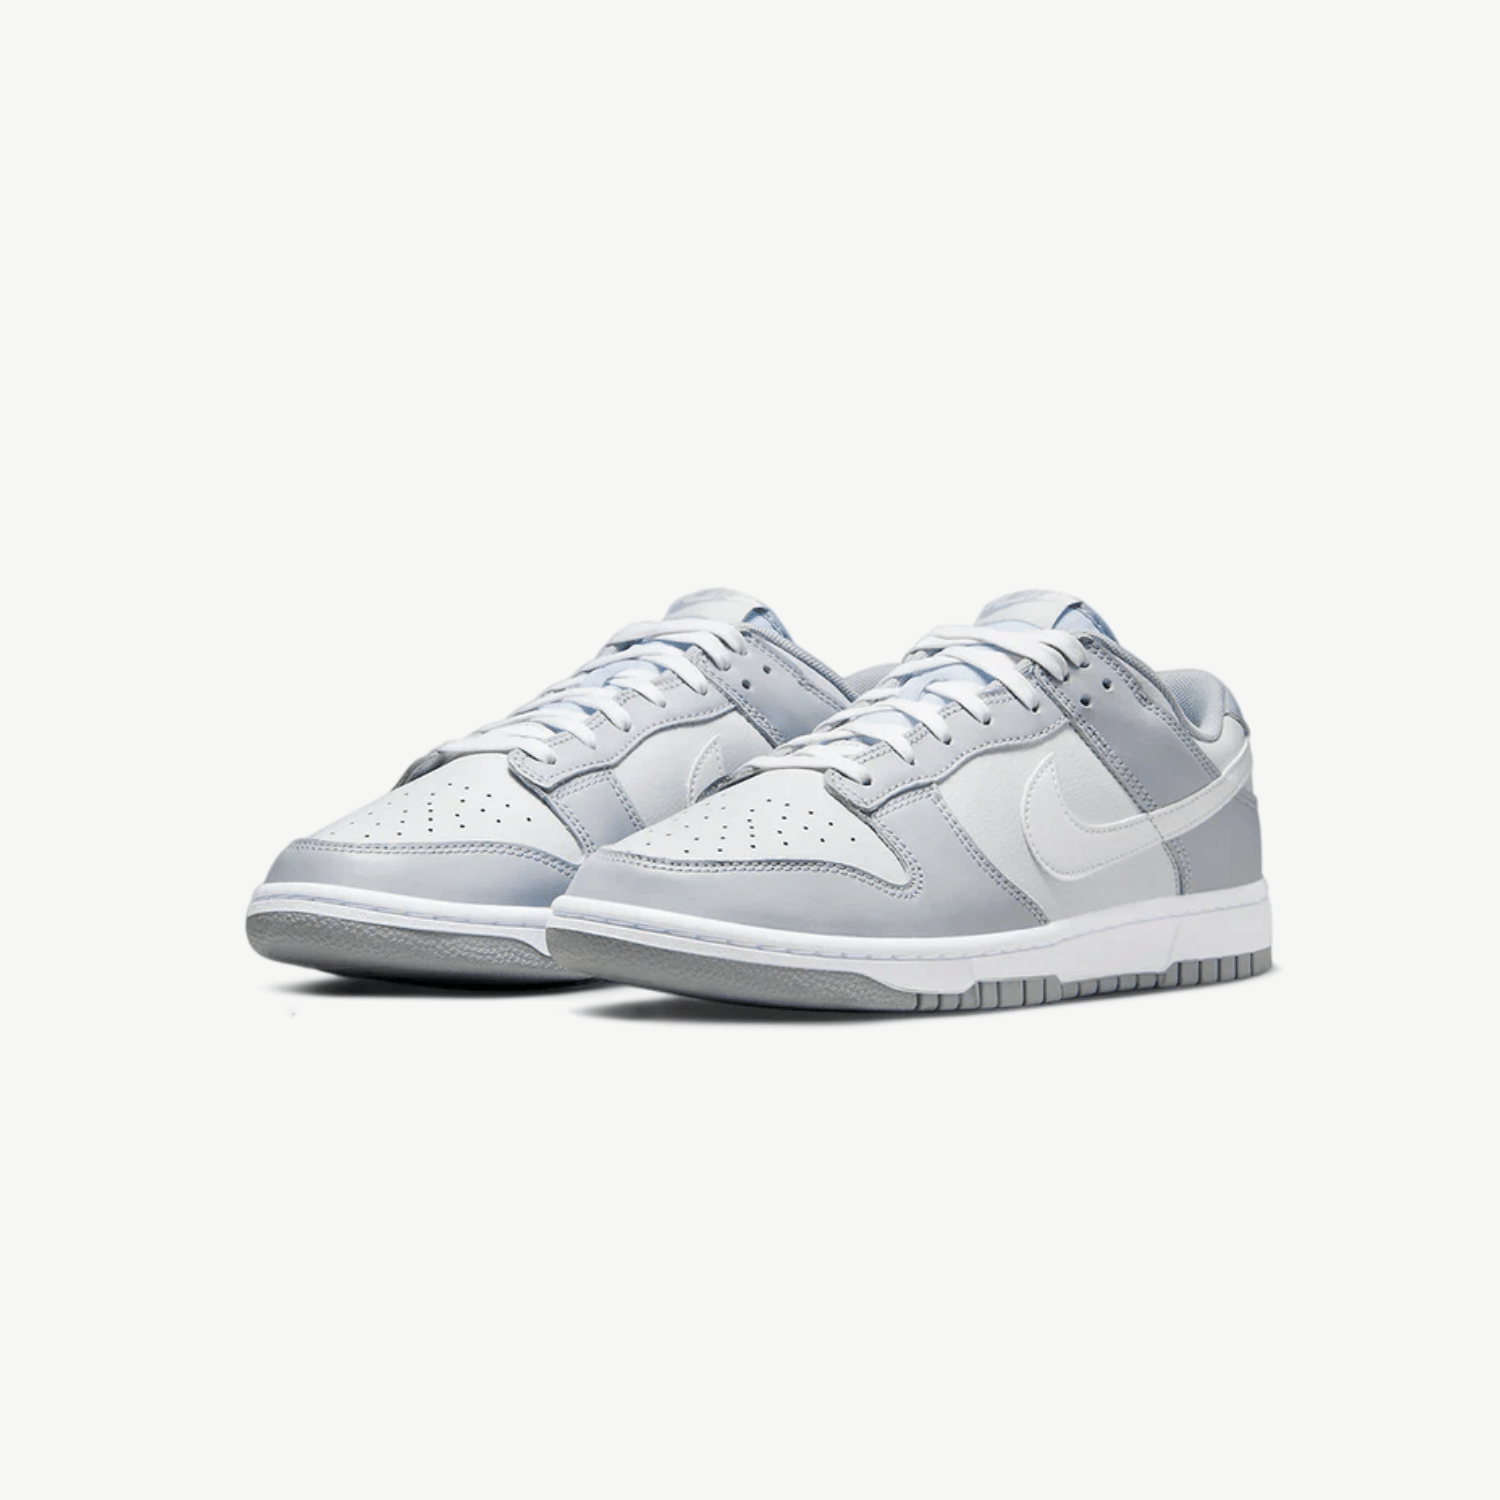      nike-dunk-low-two-tone-grey-DH9765-001-unfazed-2